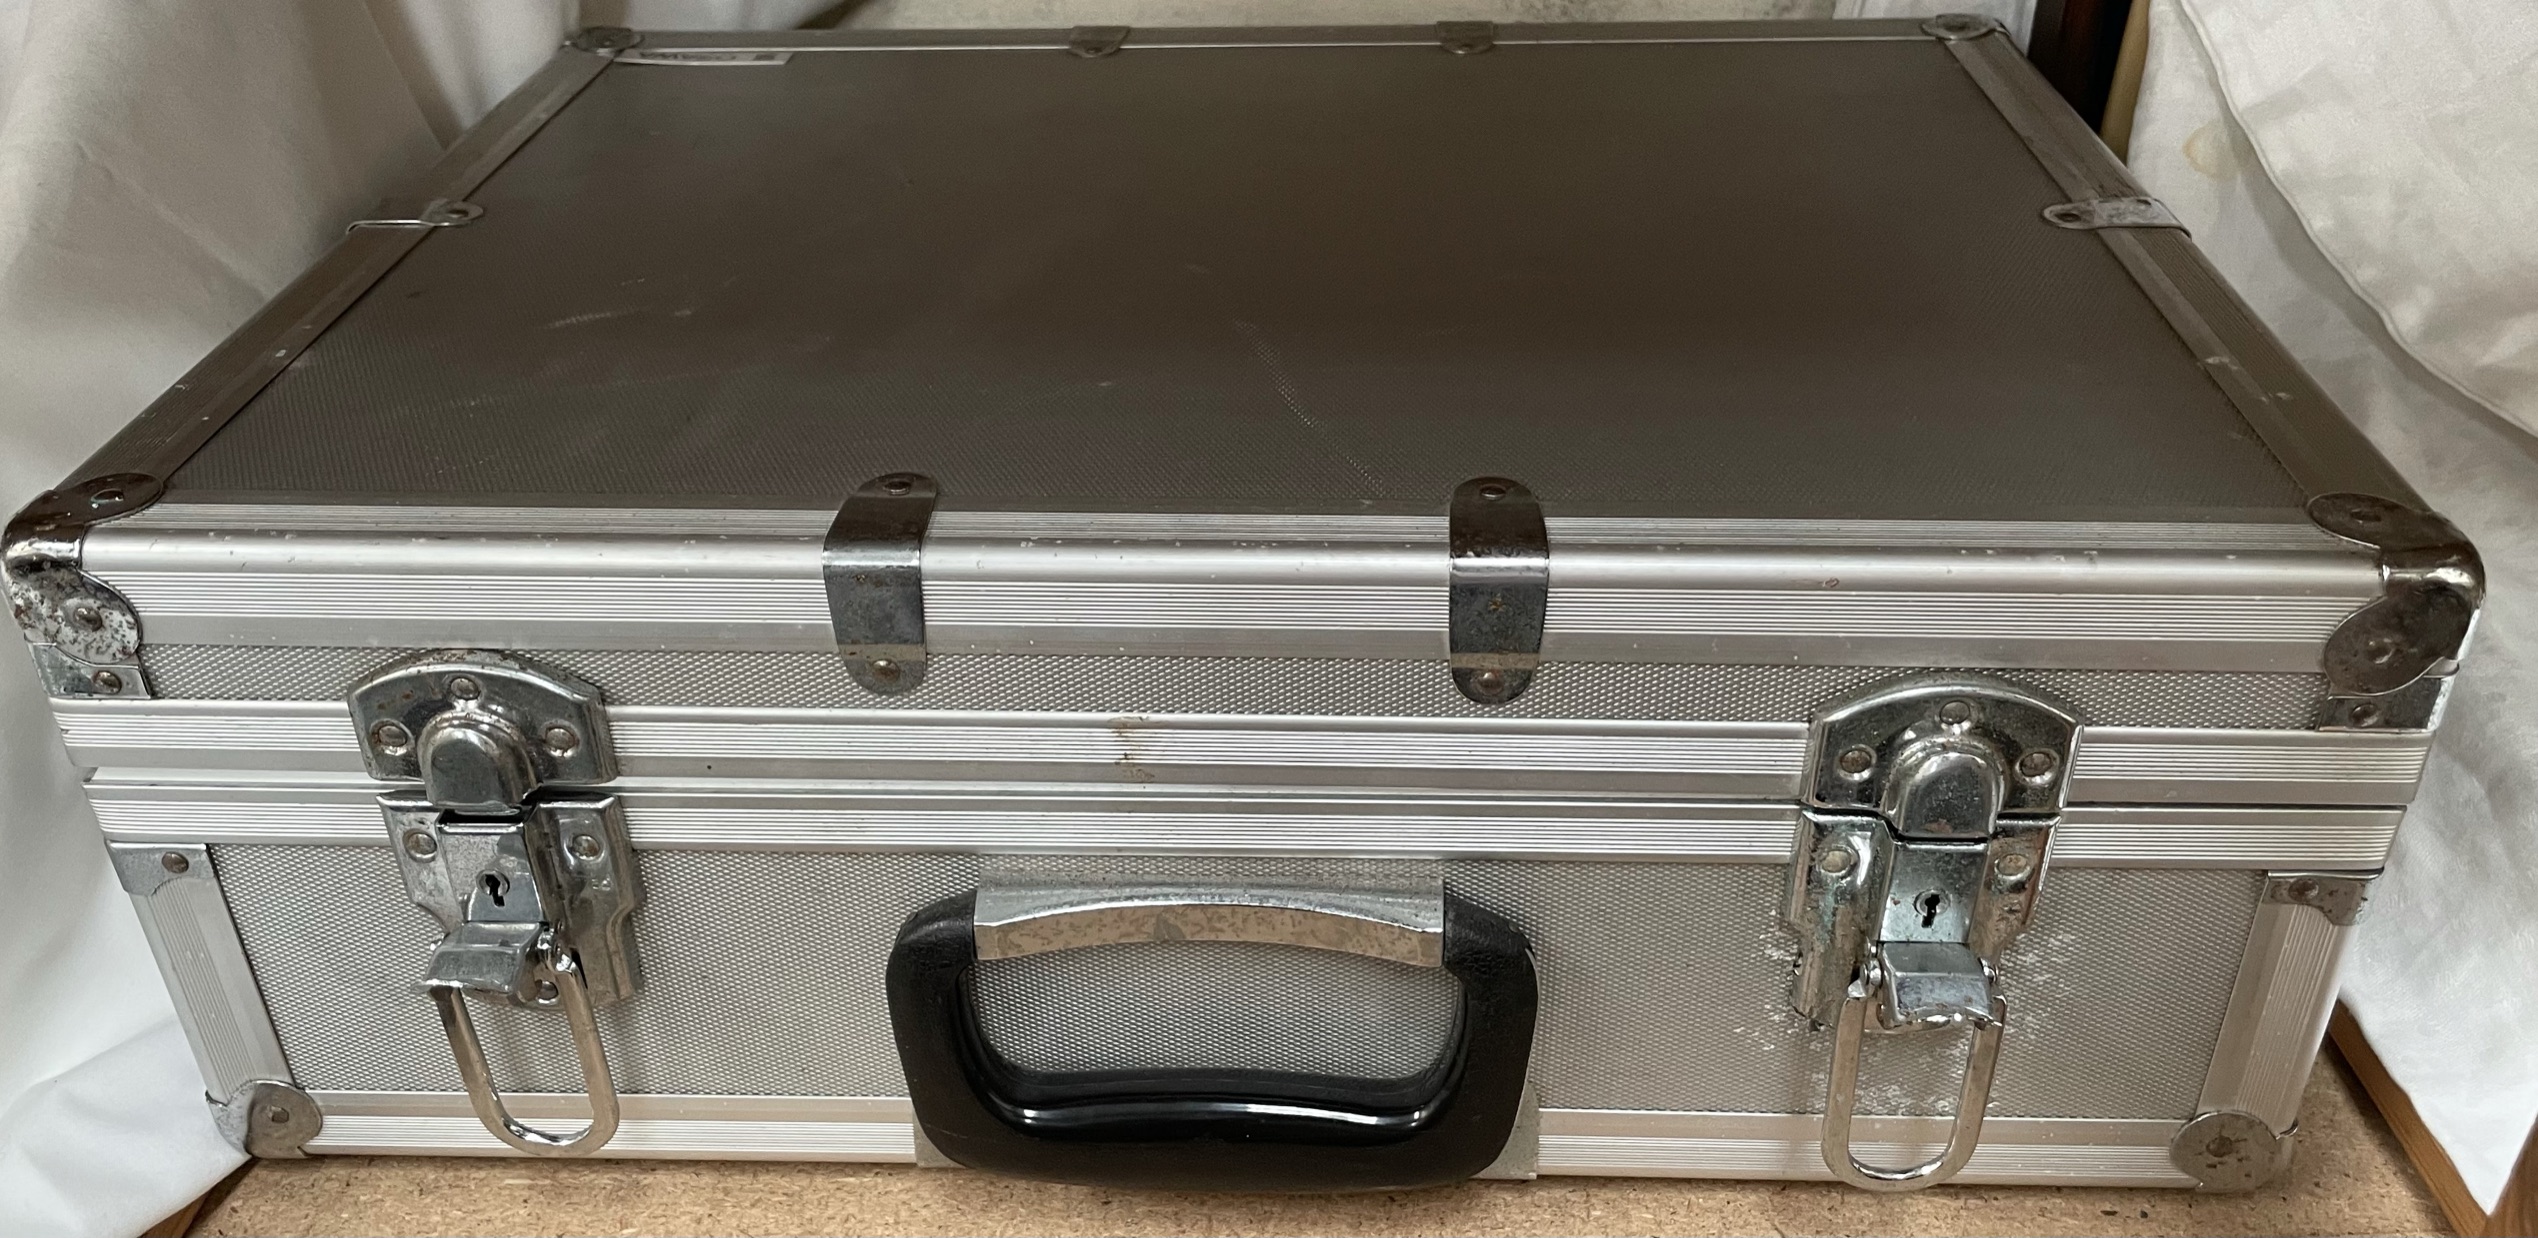 An Osawa camera suitcase with accessories